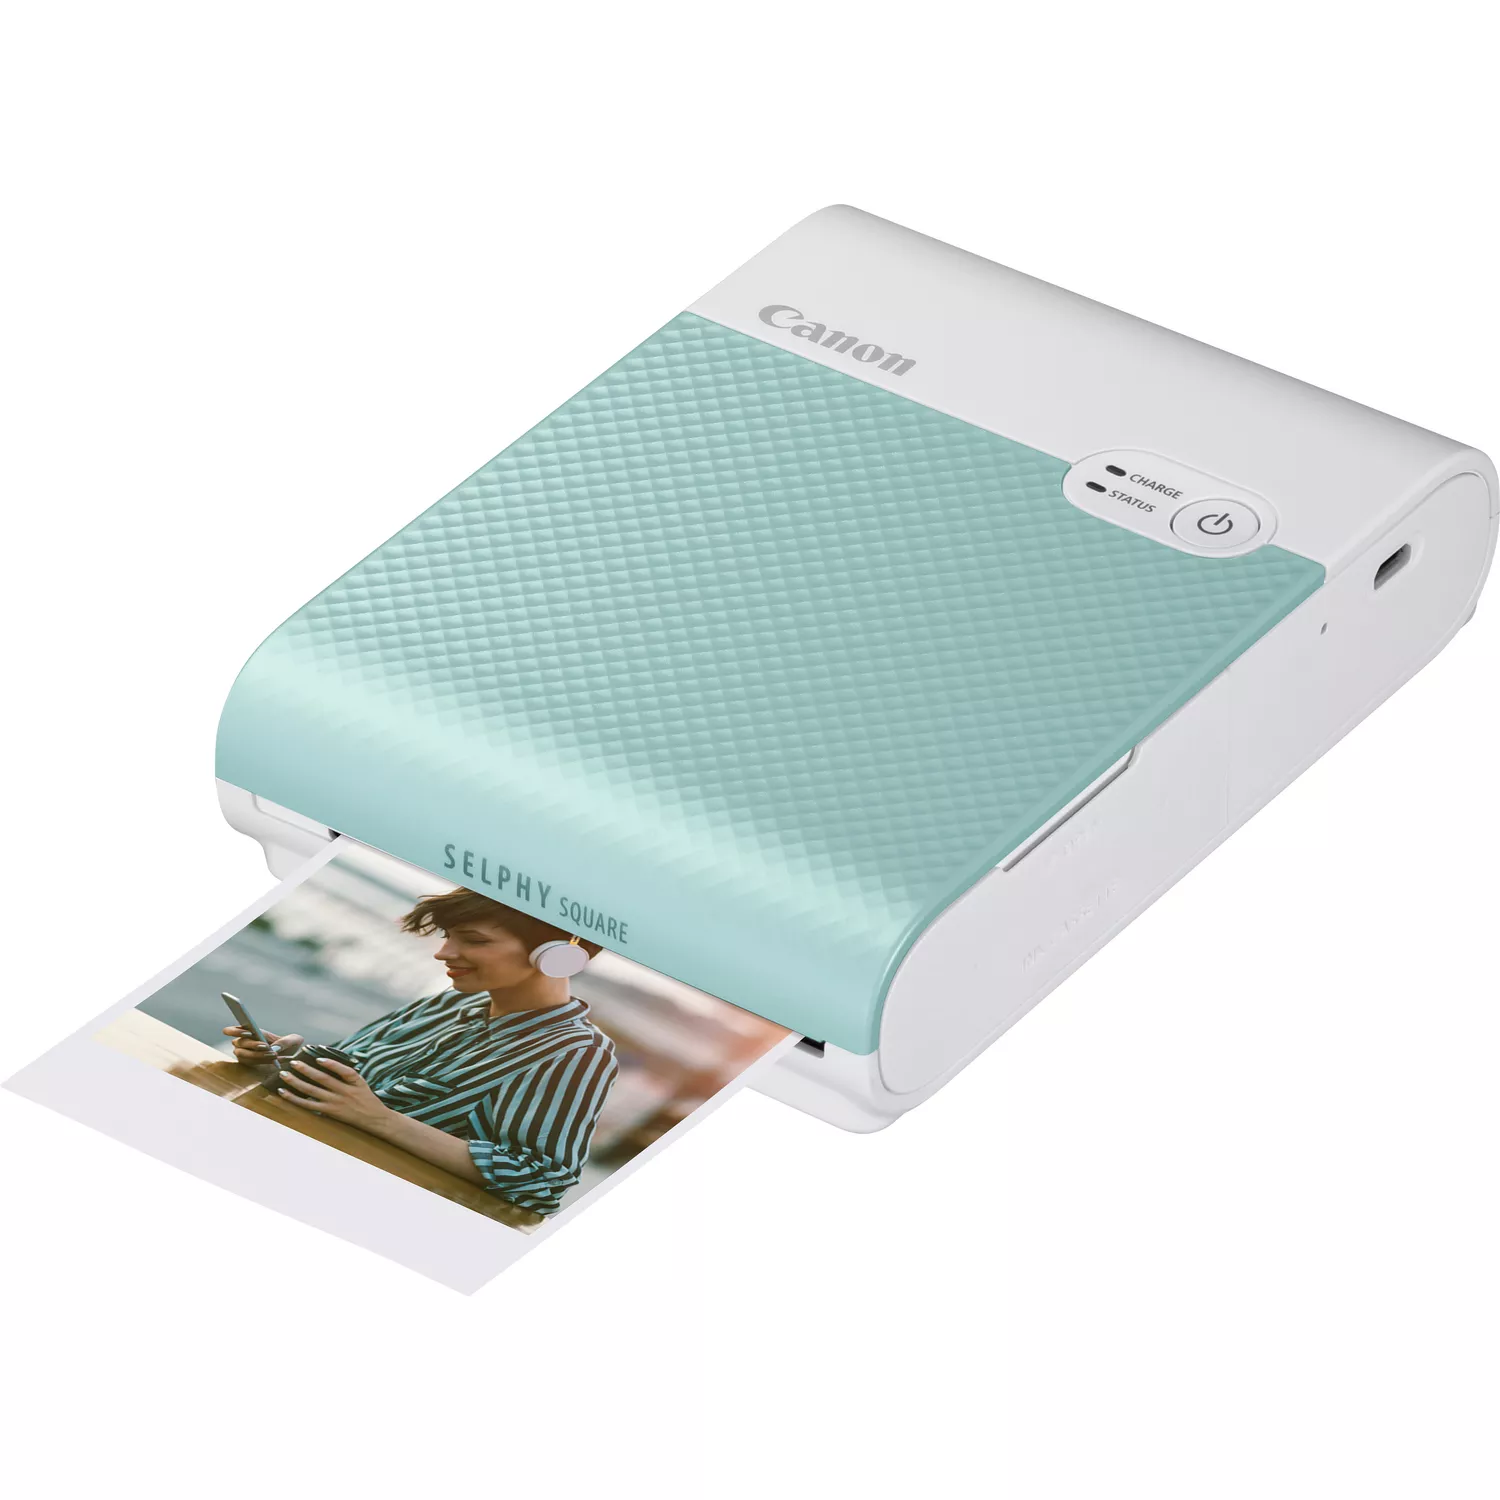 Buy Canon Selphy Square QX10 Photo Printer - White at Connection